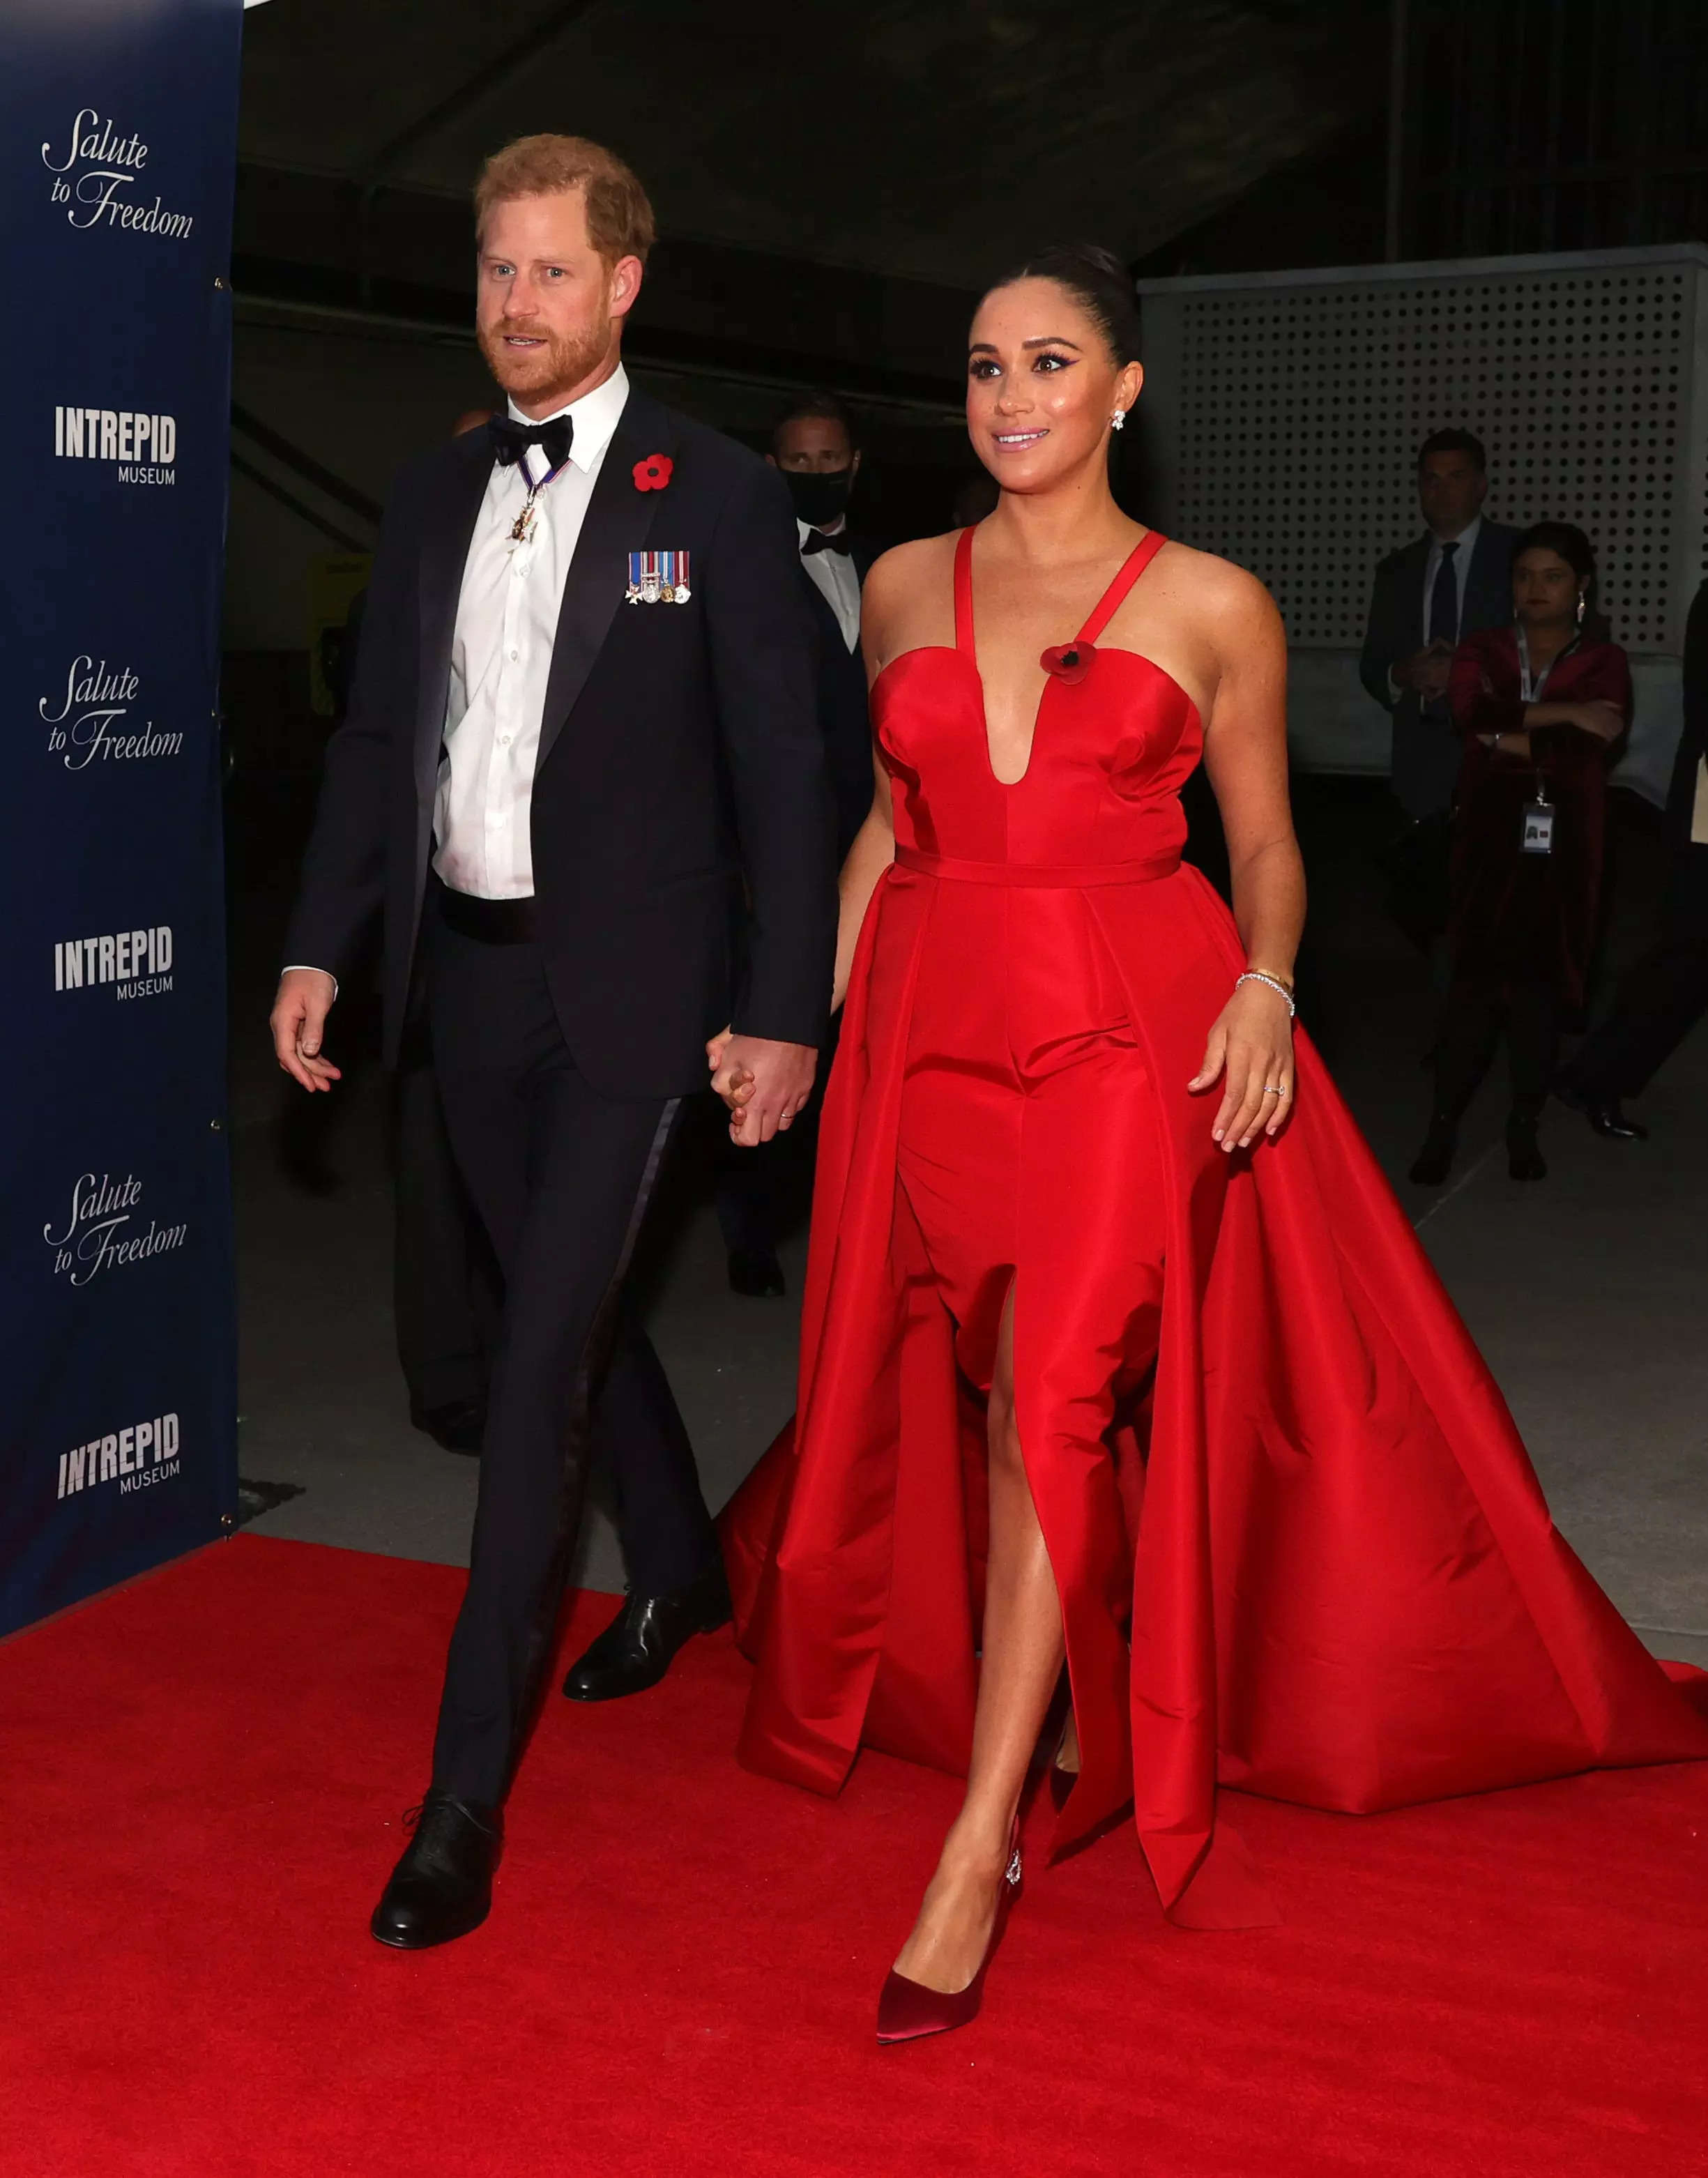 Meghan Markle dazzled in a rare red carpet appearance wearing a red